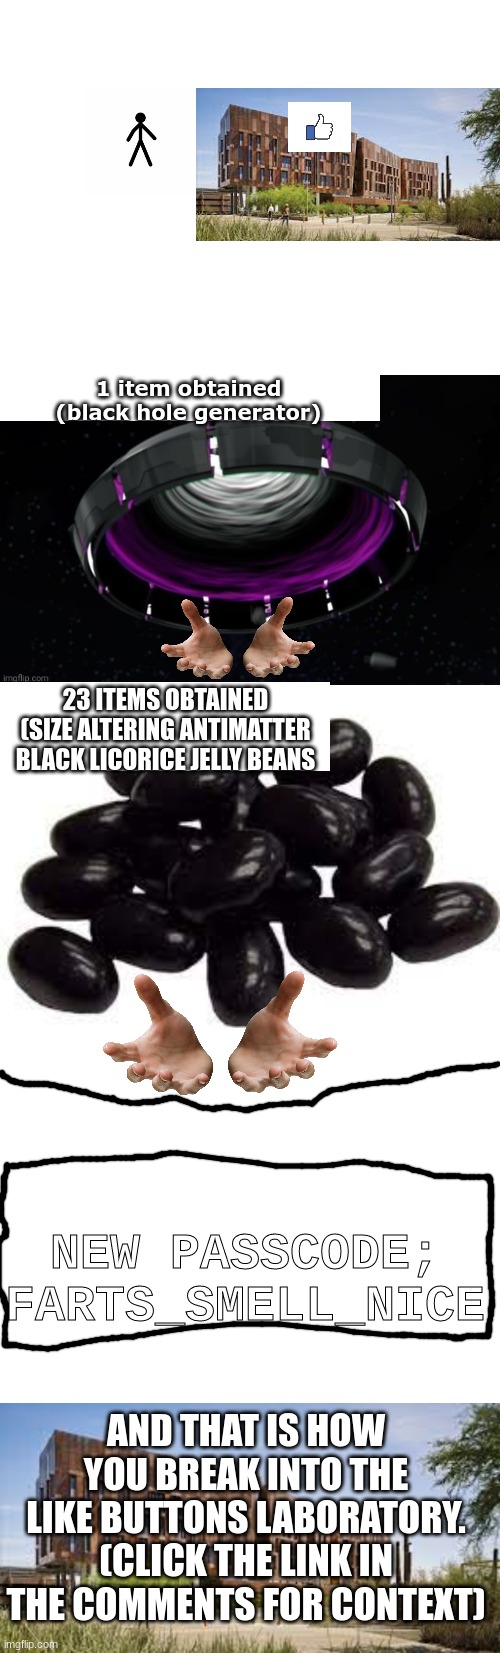 1 item obtained
(black hole generator); 23 ITEMS OBTAINED
(SIZE ALTERING ANTIMATTER BLACK LICORICE JELLY BEANS; NEW PASSCODE; FARTS_SMELL_NICE; AND THAT IS HOW YOU BREAK INTO THE LIKE BUTTONS LABORATORY. (CLICK THE LINK IN THE COMMENTS FOR CONTEXT) | image tagged in blank white template | made w/ Imgflip meme maker